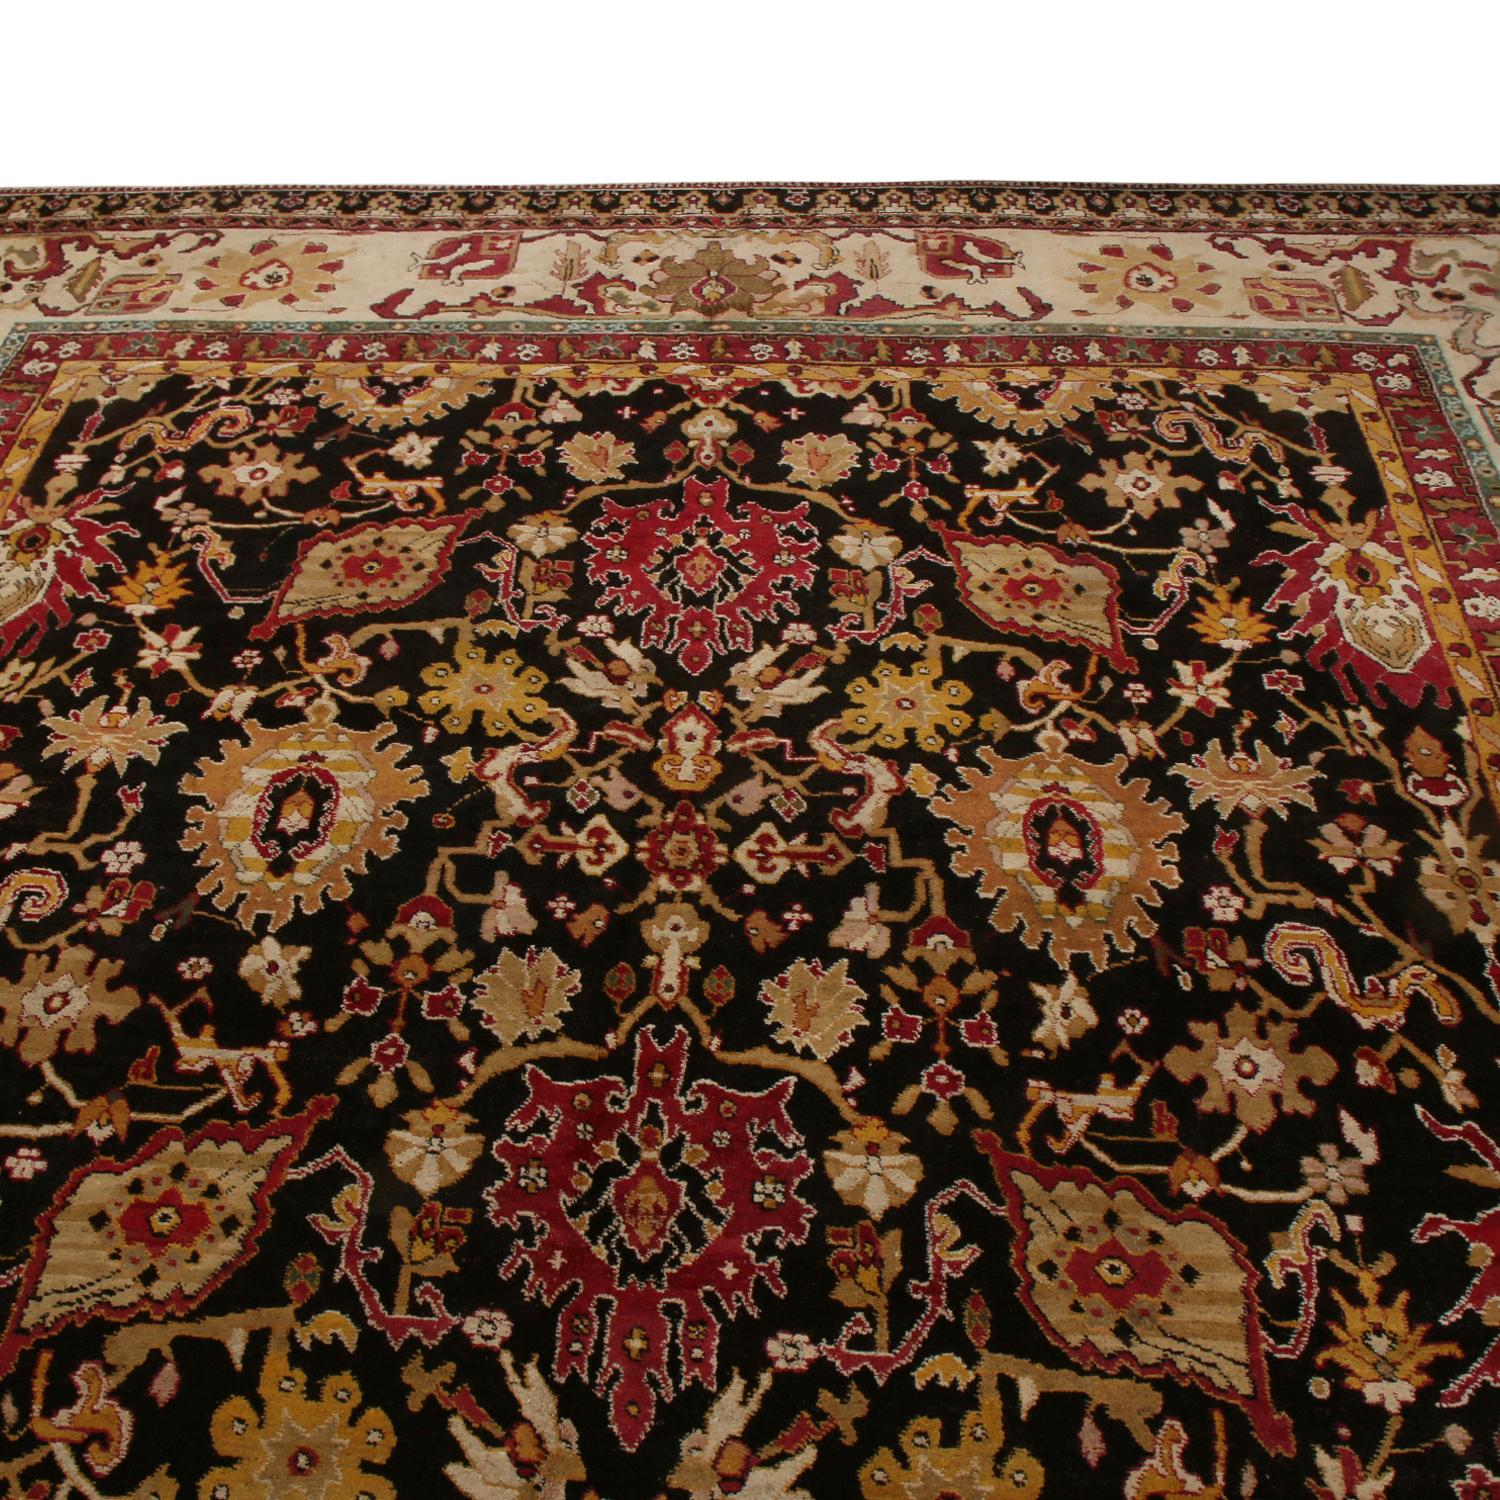 Originating from India between 1880-1890, this hand knotted antique Agra wool rug hosts an uncommon background of subtly abrashed earth tones, elegantly lifting the more regal hues of gold and red throughout a finely drawn all-over field design.
 